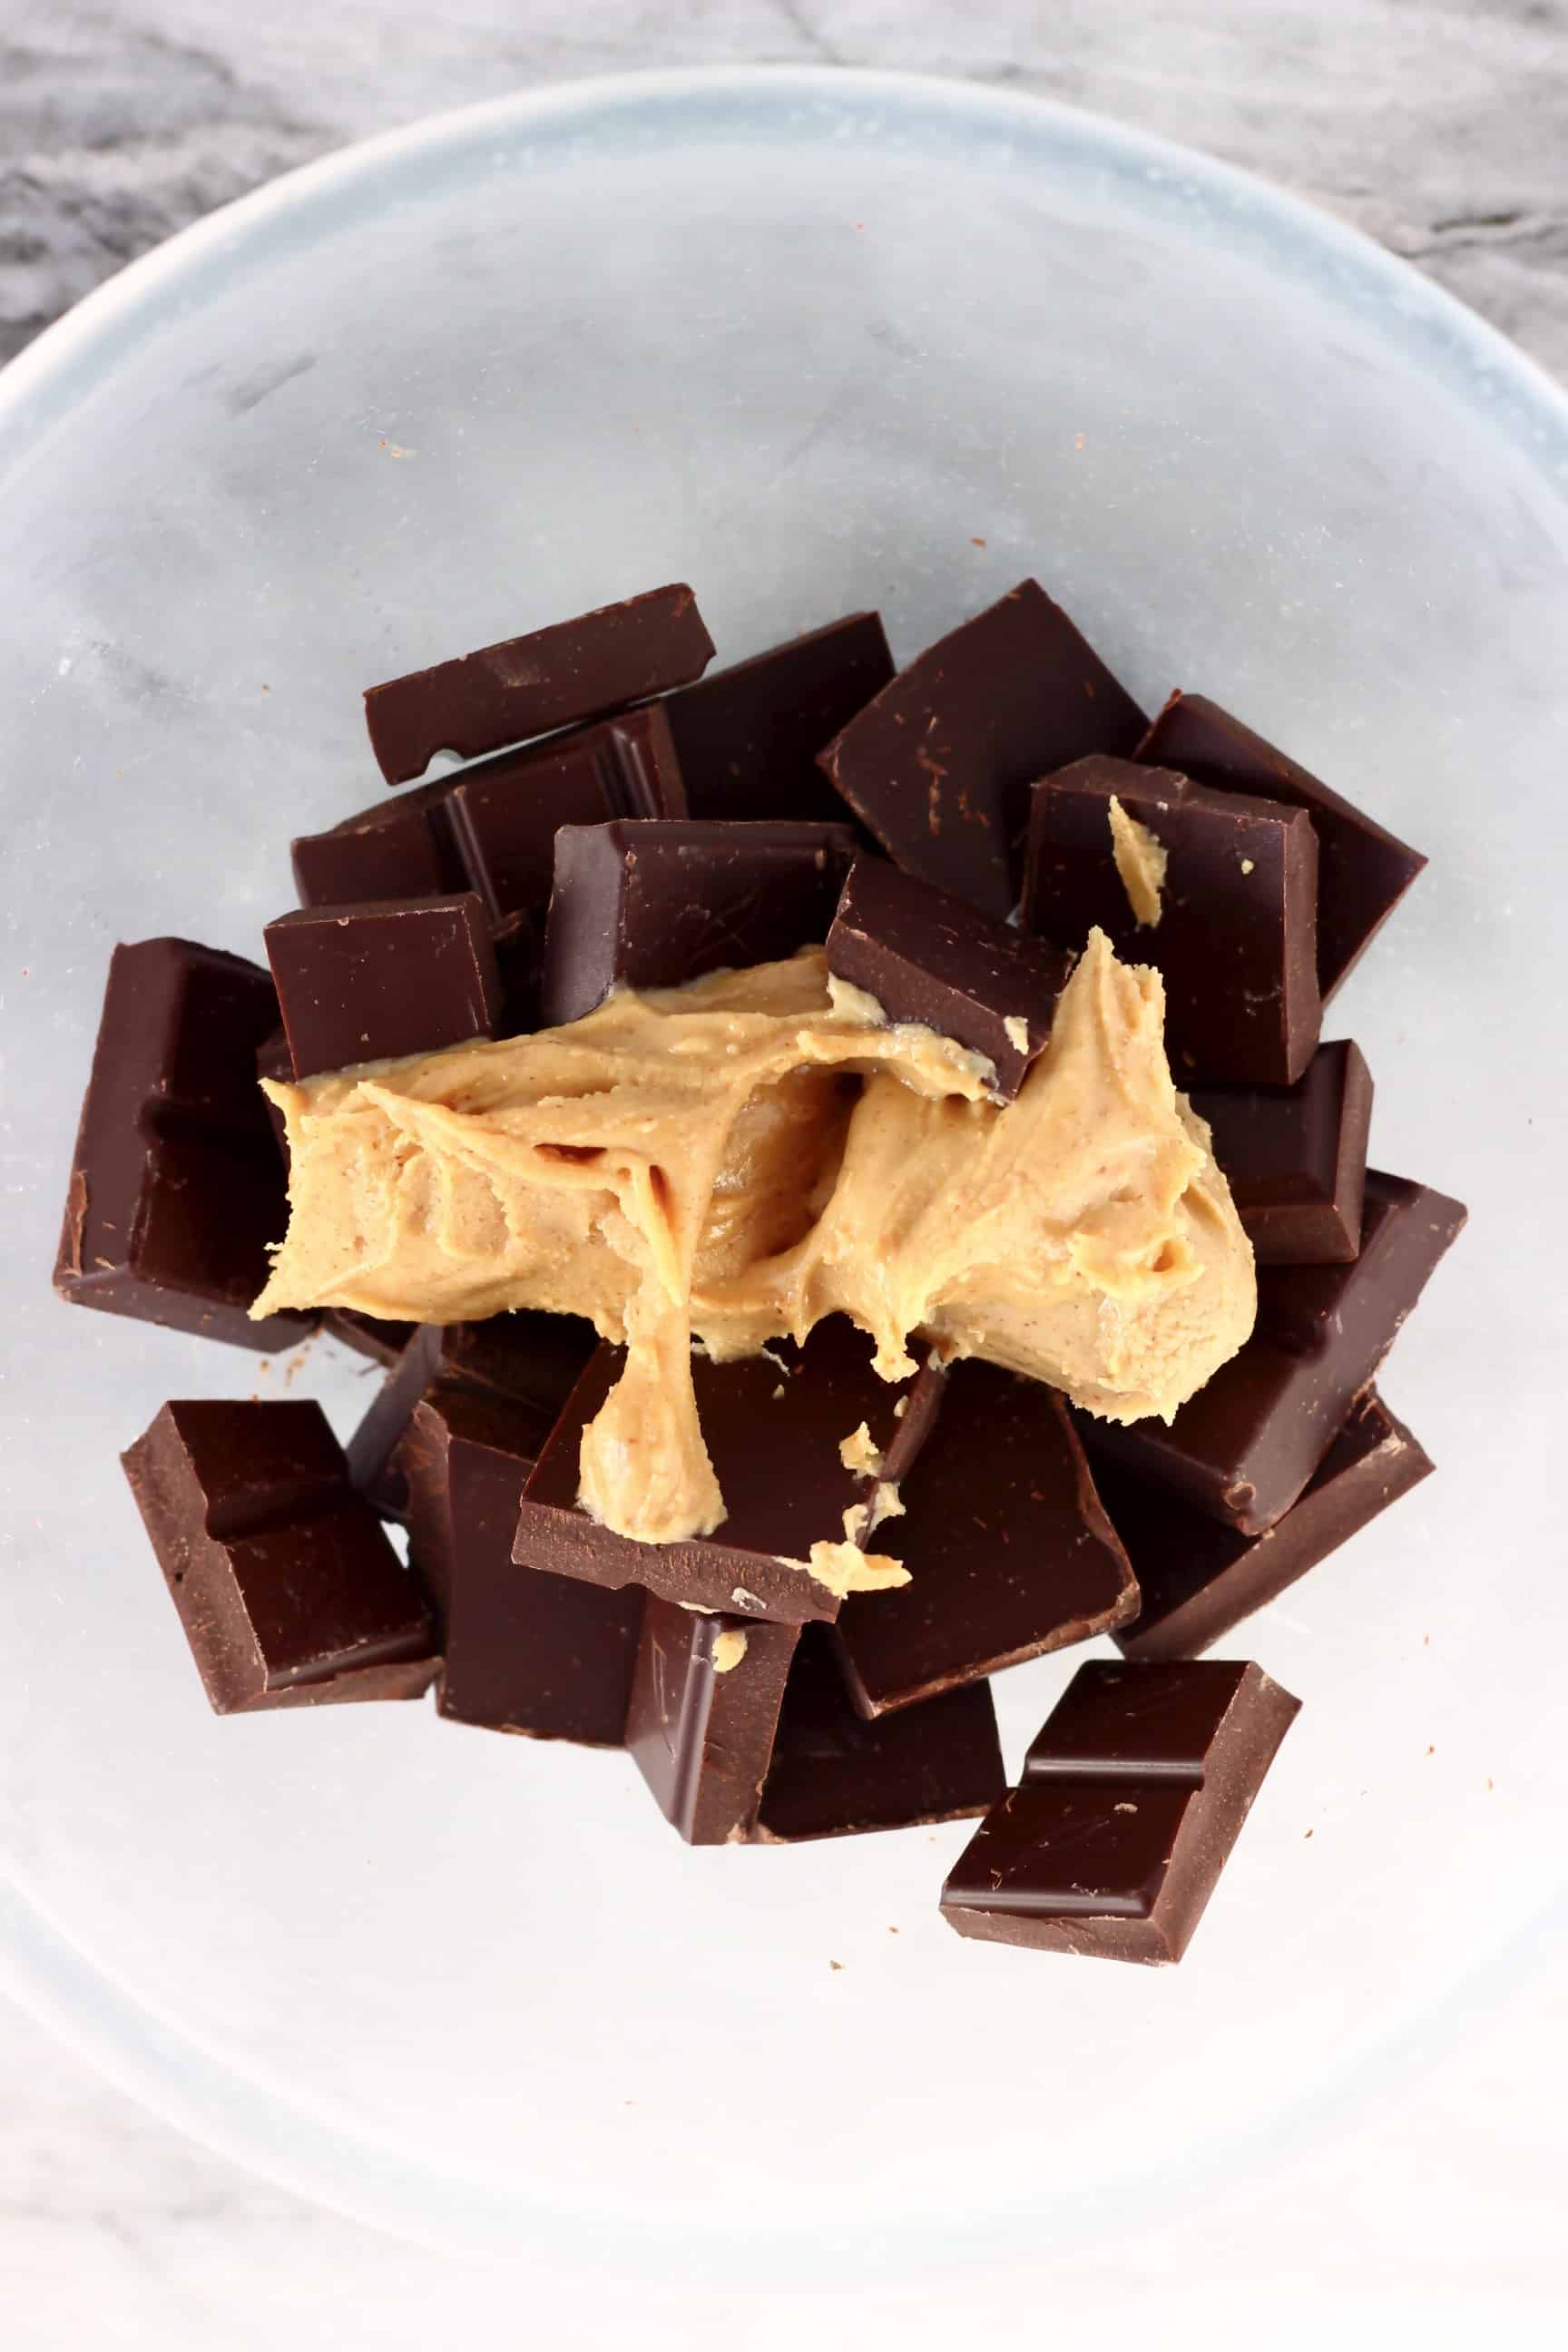 Dark chocolate pieces and peanut butter in a bowl